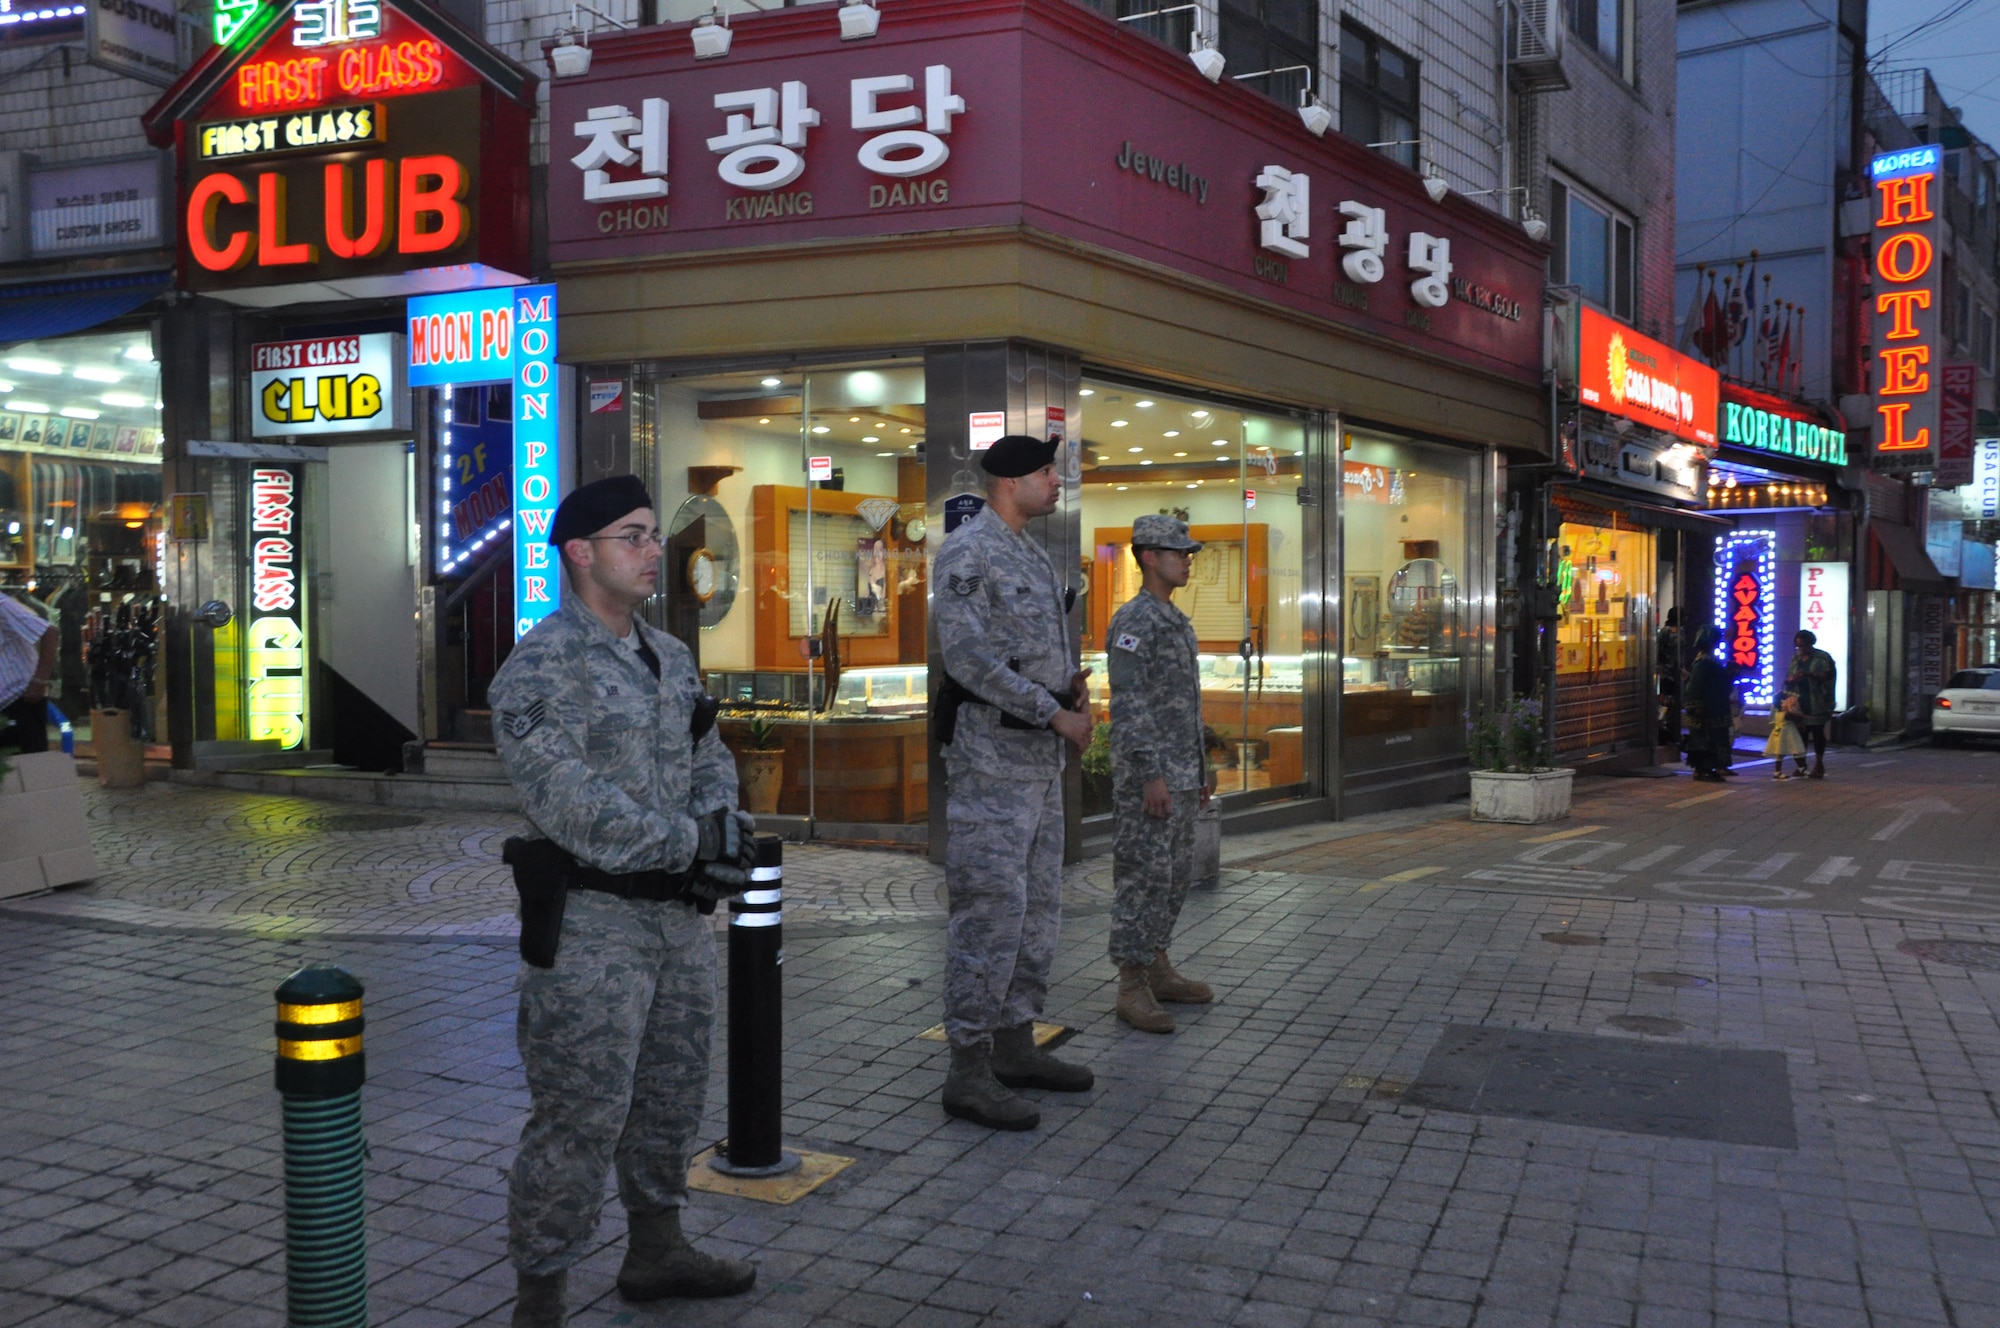 Staff Sergeants Gavin Ward and Cayman Lee, 51st Security Forces Squadron town patrolmen, survey the streets of the Songtan Entertainment District just outside of Osan Air Base alongside a Republic of Korea Army soldier, July 12, 2012.  Korean Augmentees to the U.S. Army will now accompany town patrols to act as translators between Korean locals and U.S. service members. This is the first time U.S. Airmen and KATUSAs have patrolled together. (U.S. Air Force photo/Senior Airman Michael Battles)